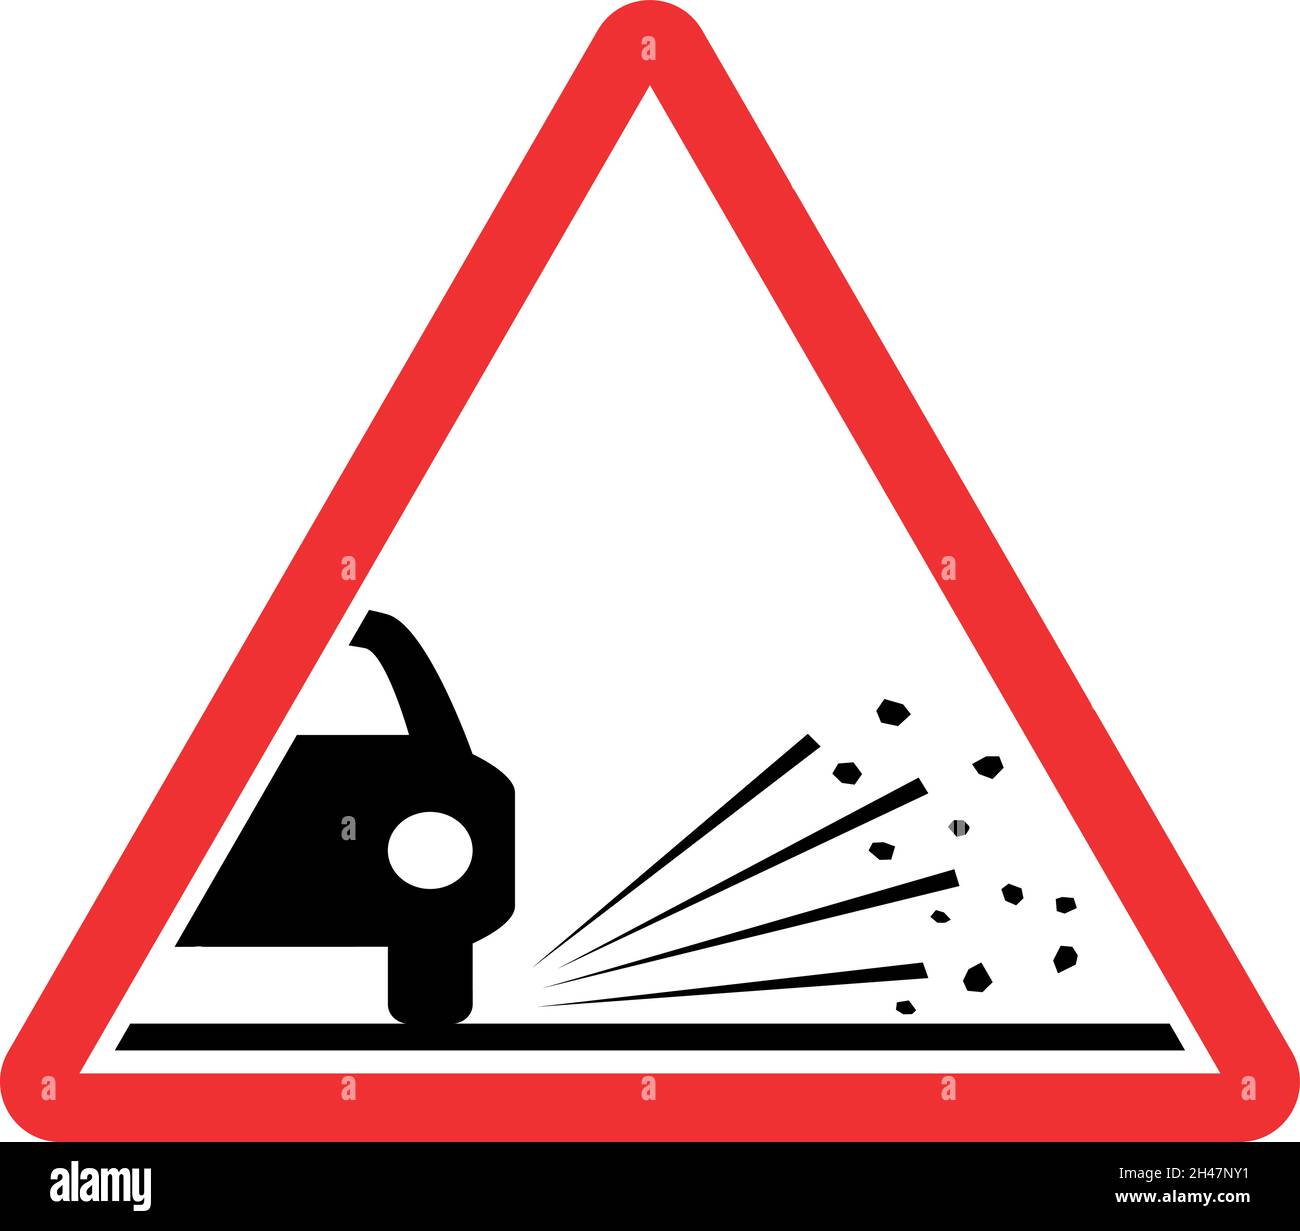 Loose chippings road sign. Red triangle background. Traffic signs and symbols. Stock Vector